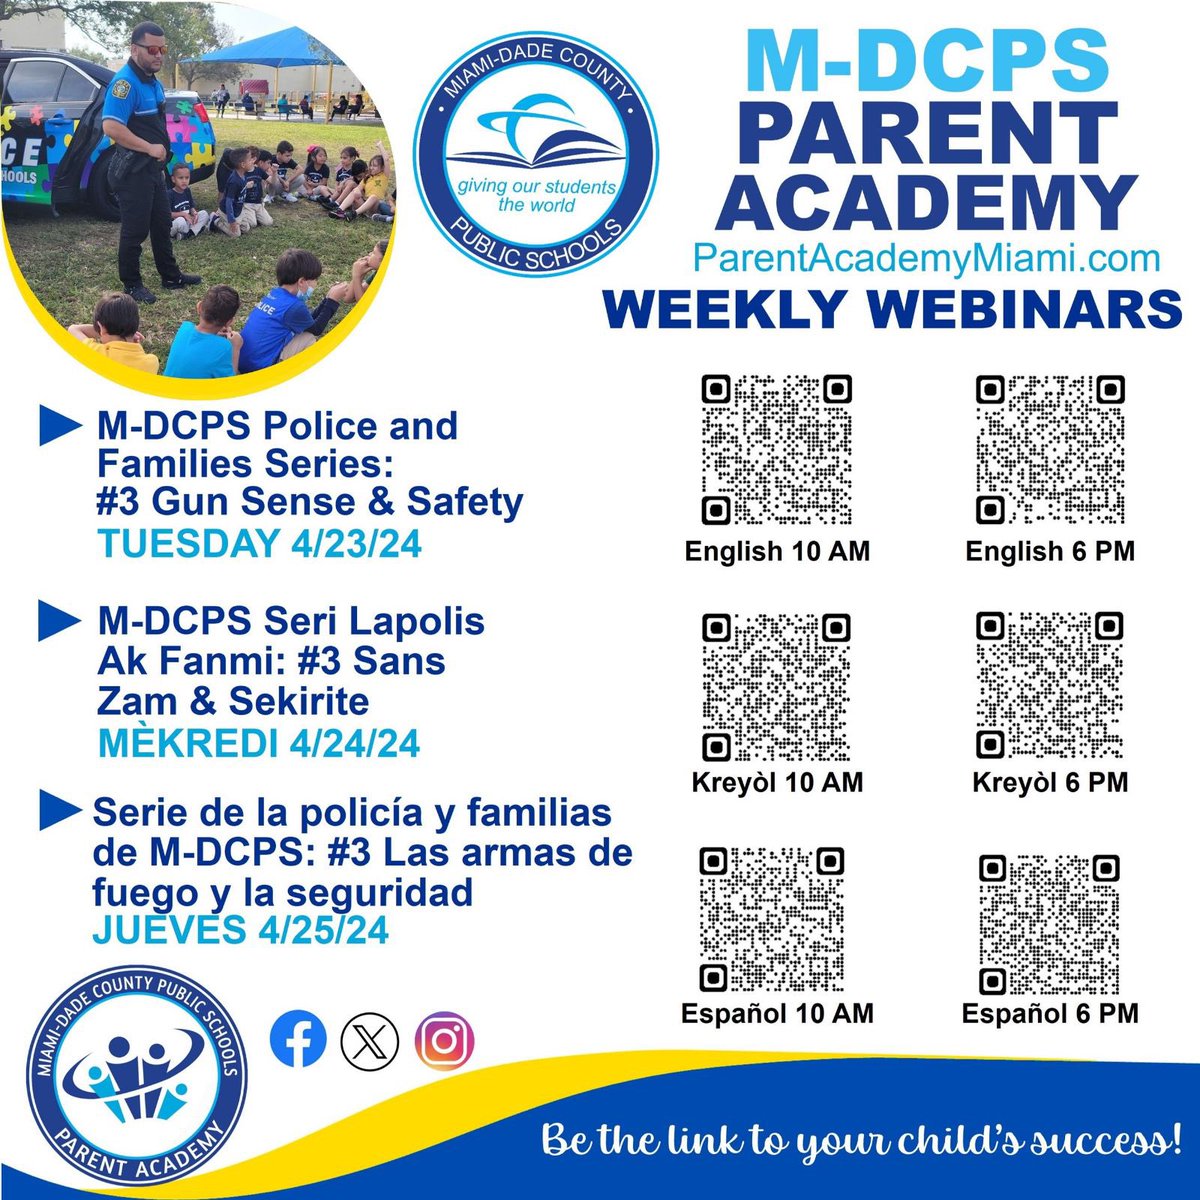 There is still time to register for this week’s @ParentAcadMiami webinar on Gun Sense & Safety. Officers will be available to provide tips & answer your questions. Scan the QR codes or visit ParentAcademyMiami.com to register. #YourBestChoiceMDCPS @SuptDotres @MDSPDChief @MDCPS